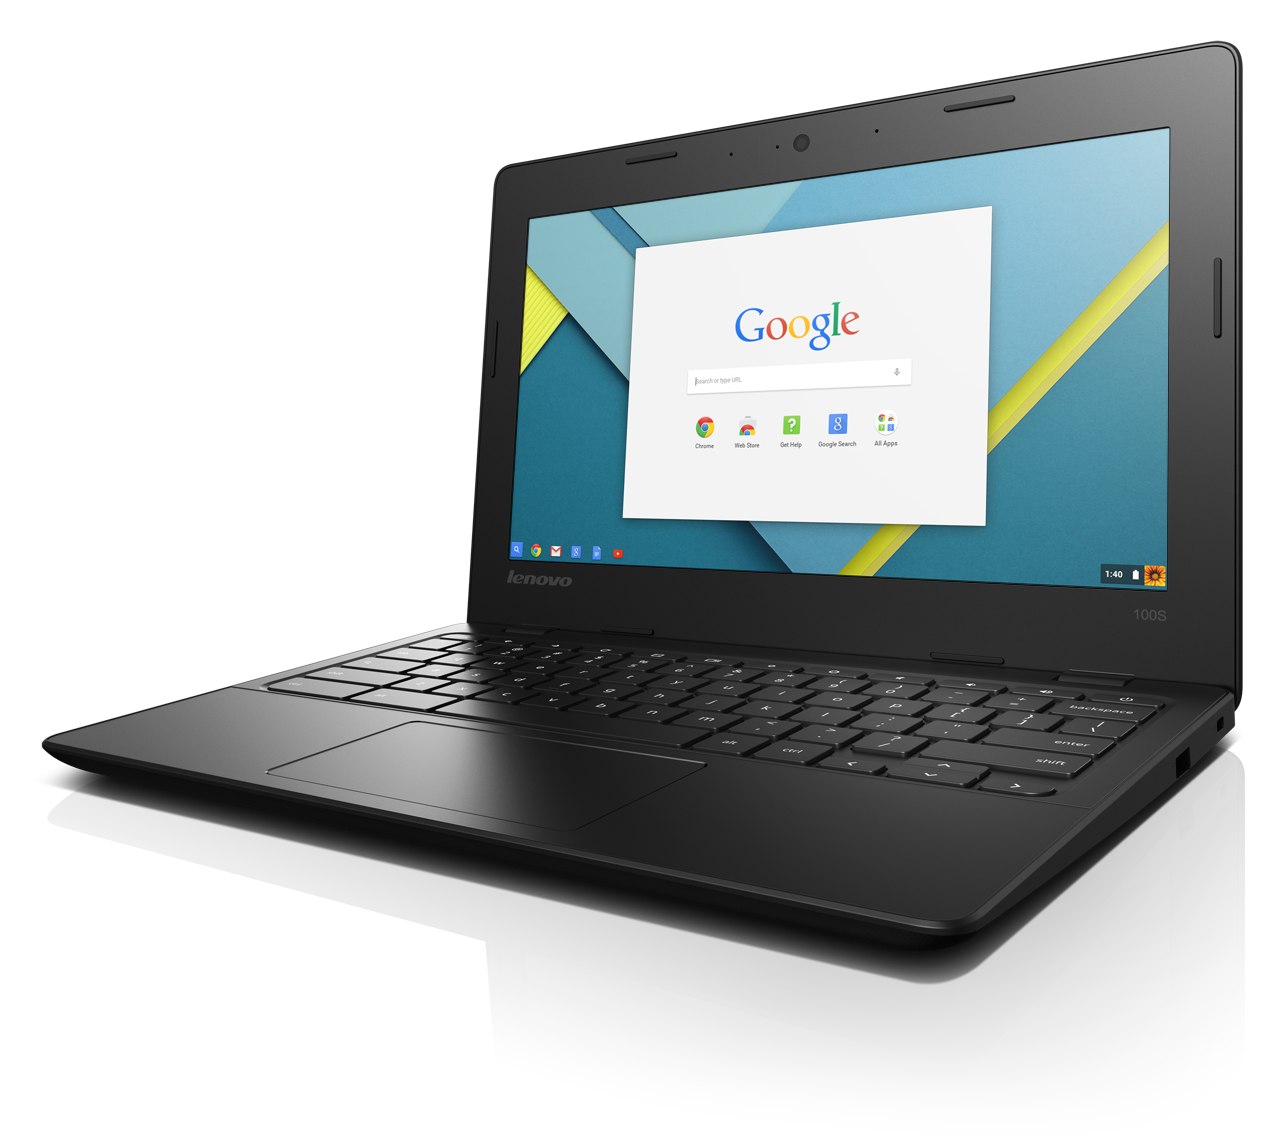 Lenovo Chromebook 100S is beautiful and affordable - 1280 x 1142 png 650kB